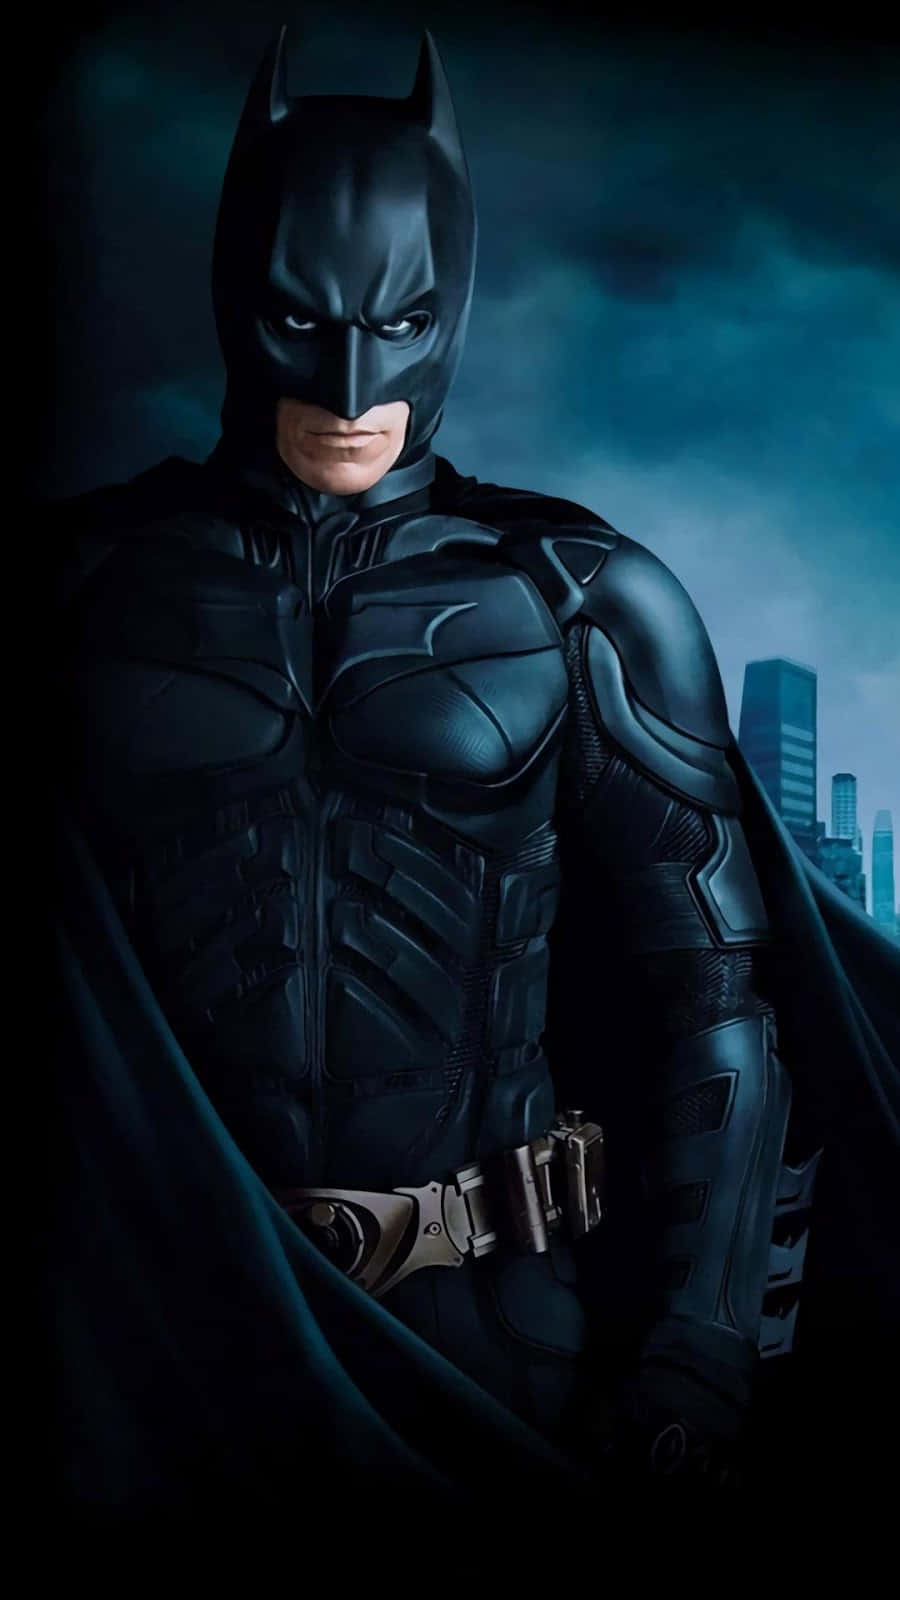 Batman android ready for the next mission. Wallpaper